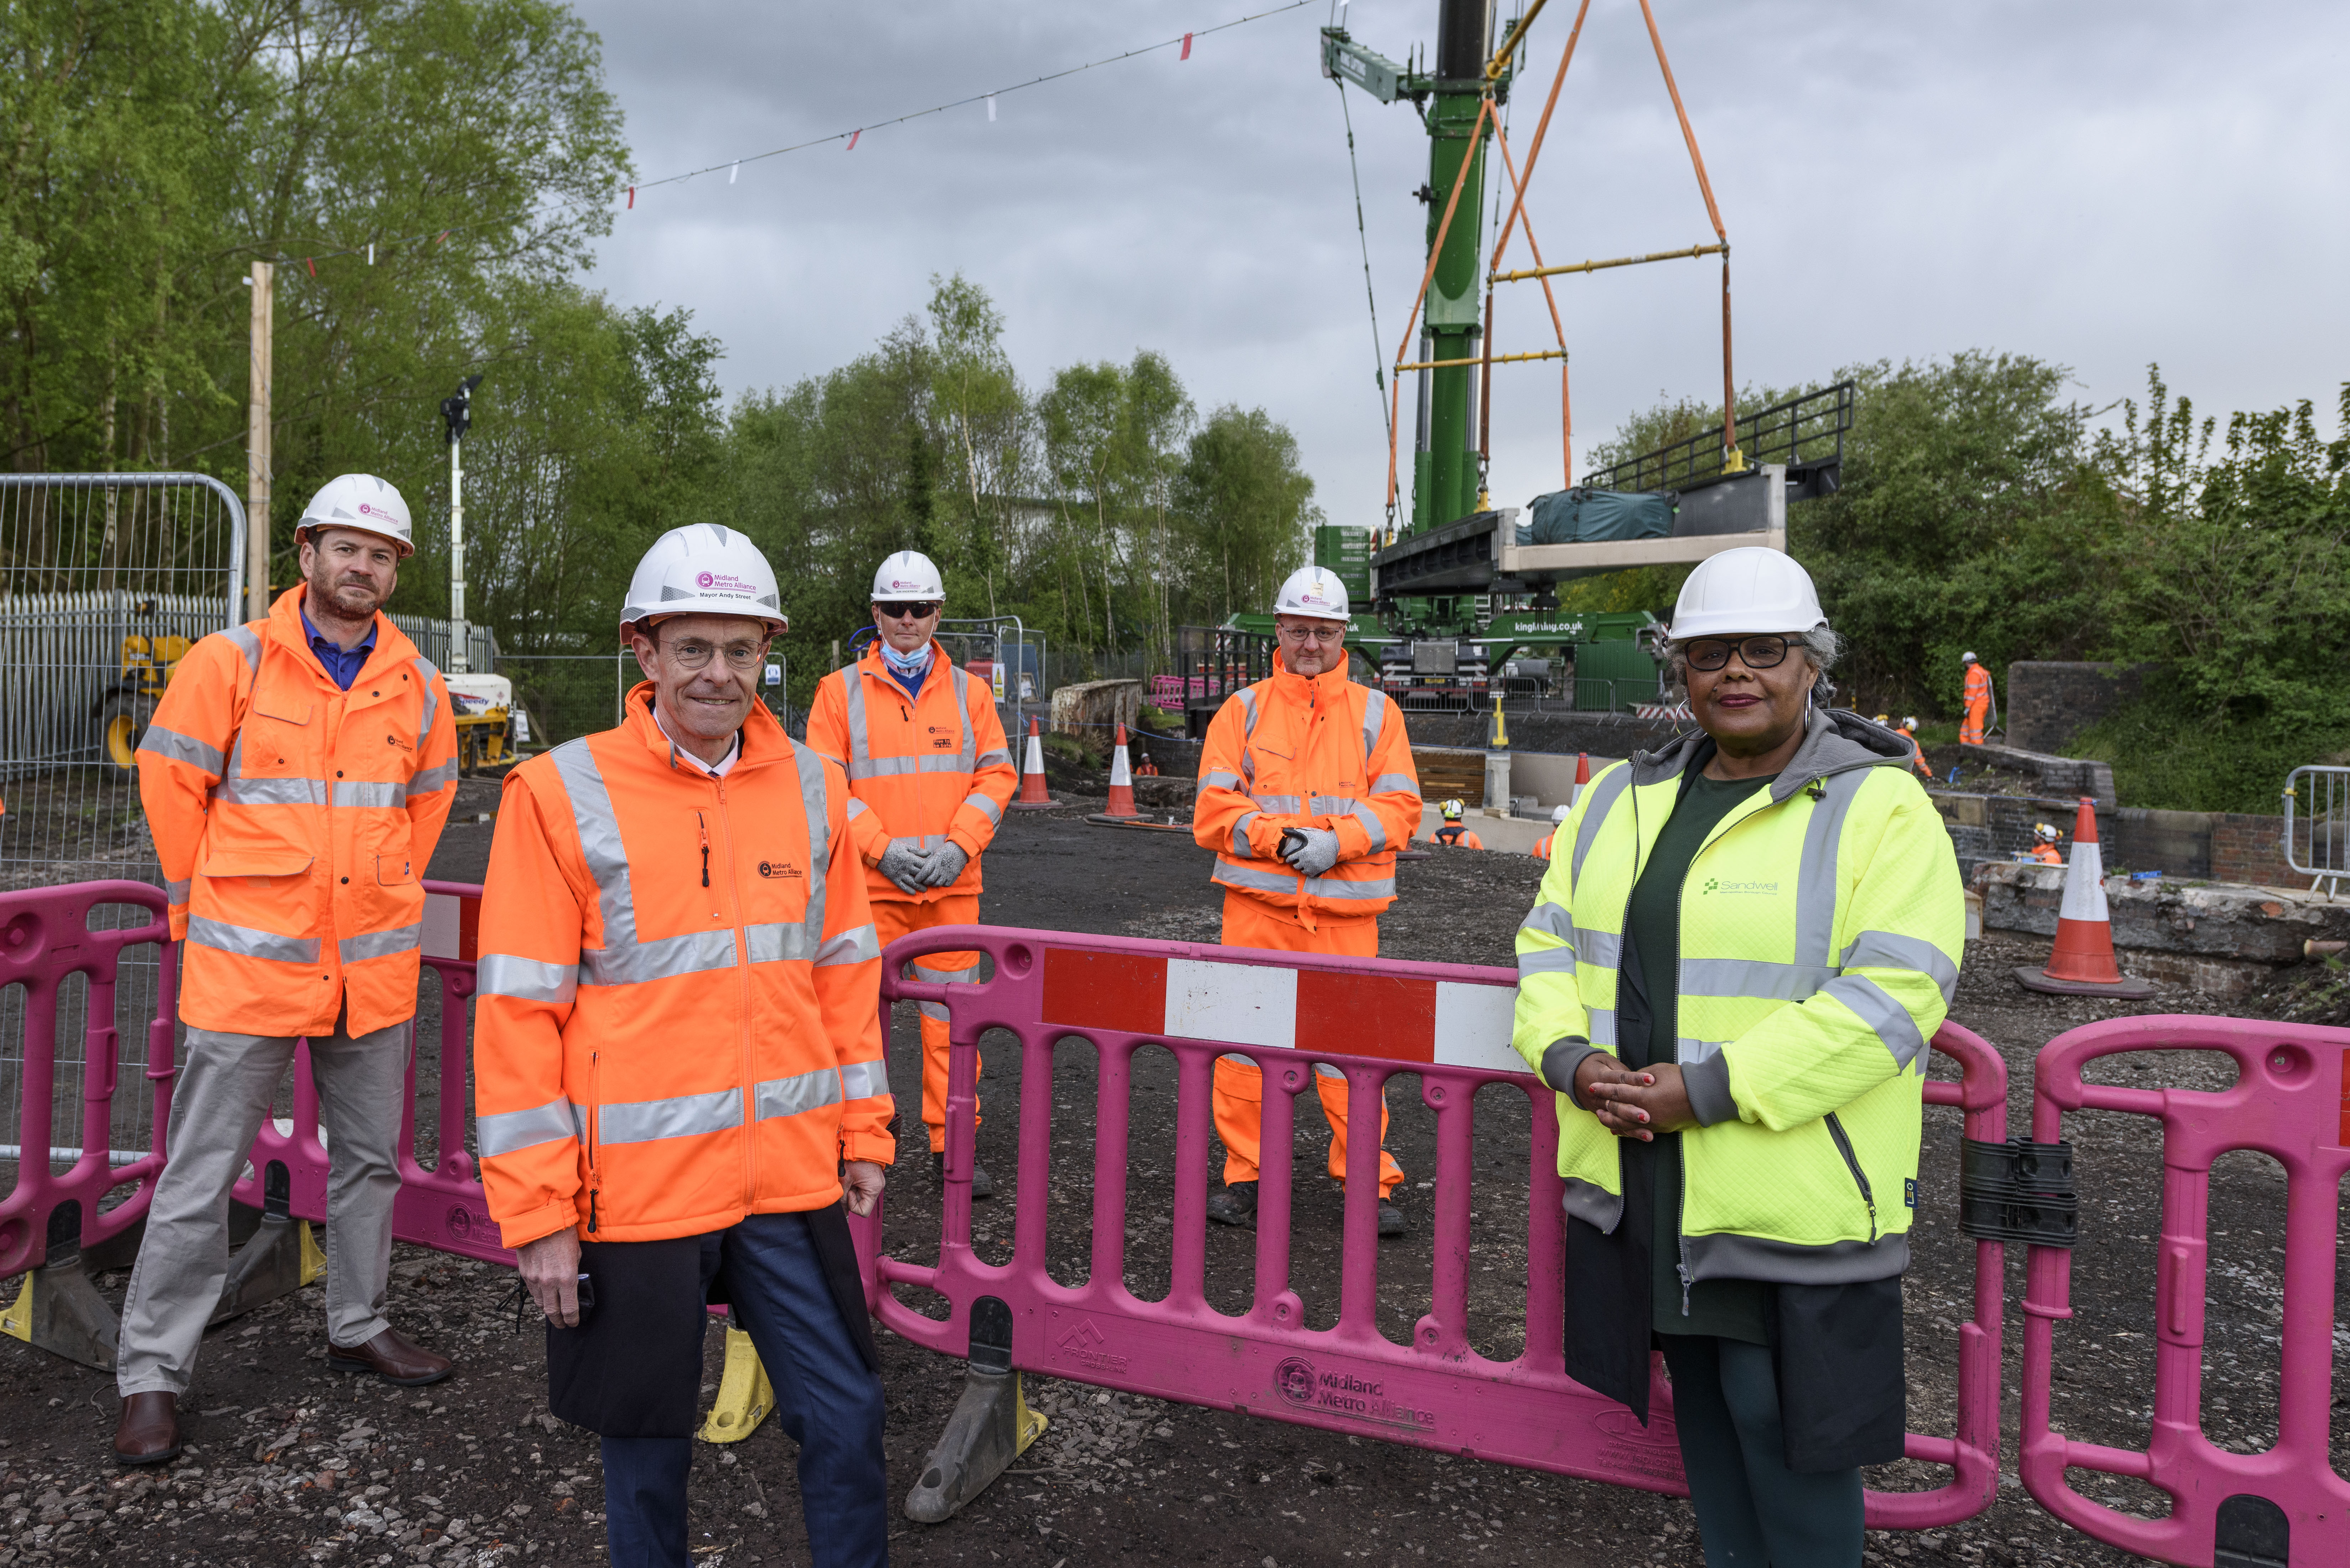 (From left to right) James Dennison (Canal and River Trust); Iain Anderson (Colas Rail UK / Midland Metro Alliance); Ian Collins (Midland Metro Alliance); Andy Street (Mayor of the West Midlands) and Councillor Jackie Taylor (Sandwell Council) celebrate the installation of the first new structure for the Wednesbury to Brierley Hill Metro extension.